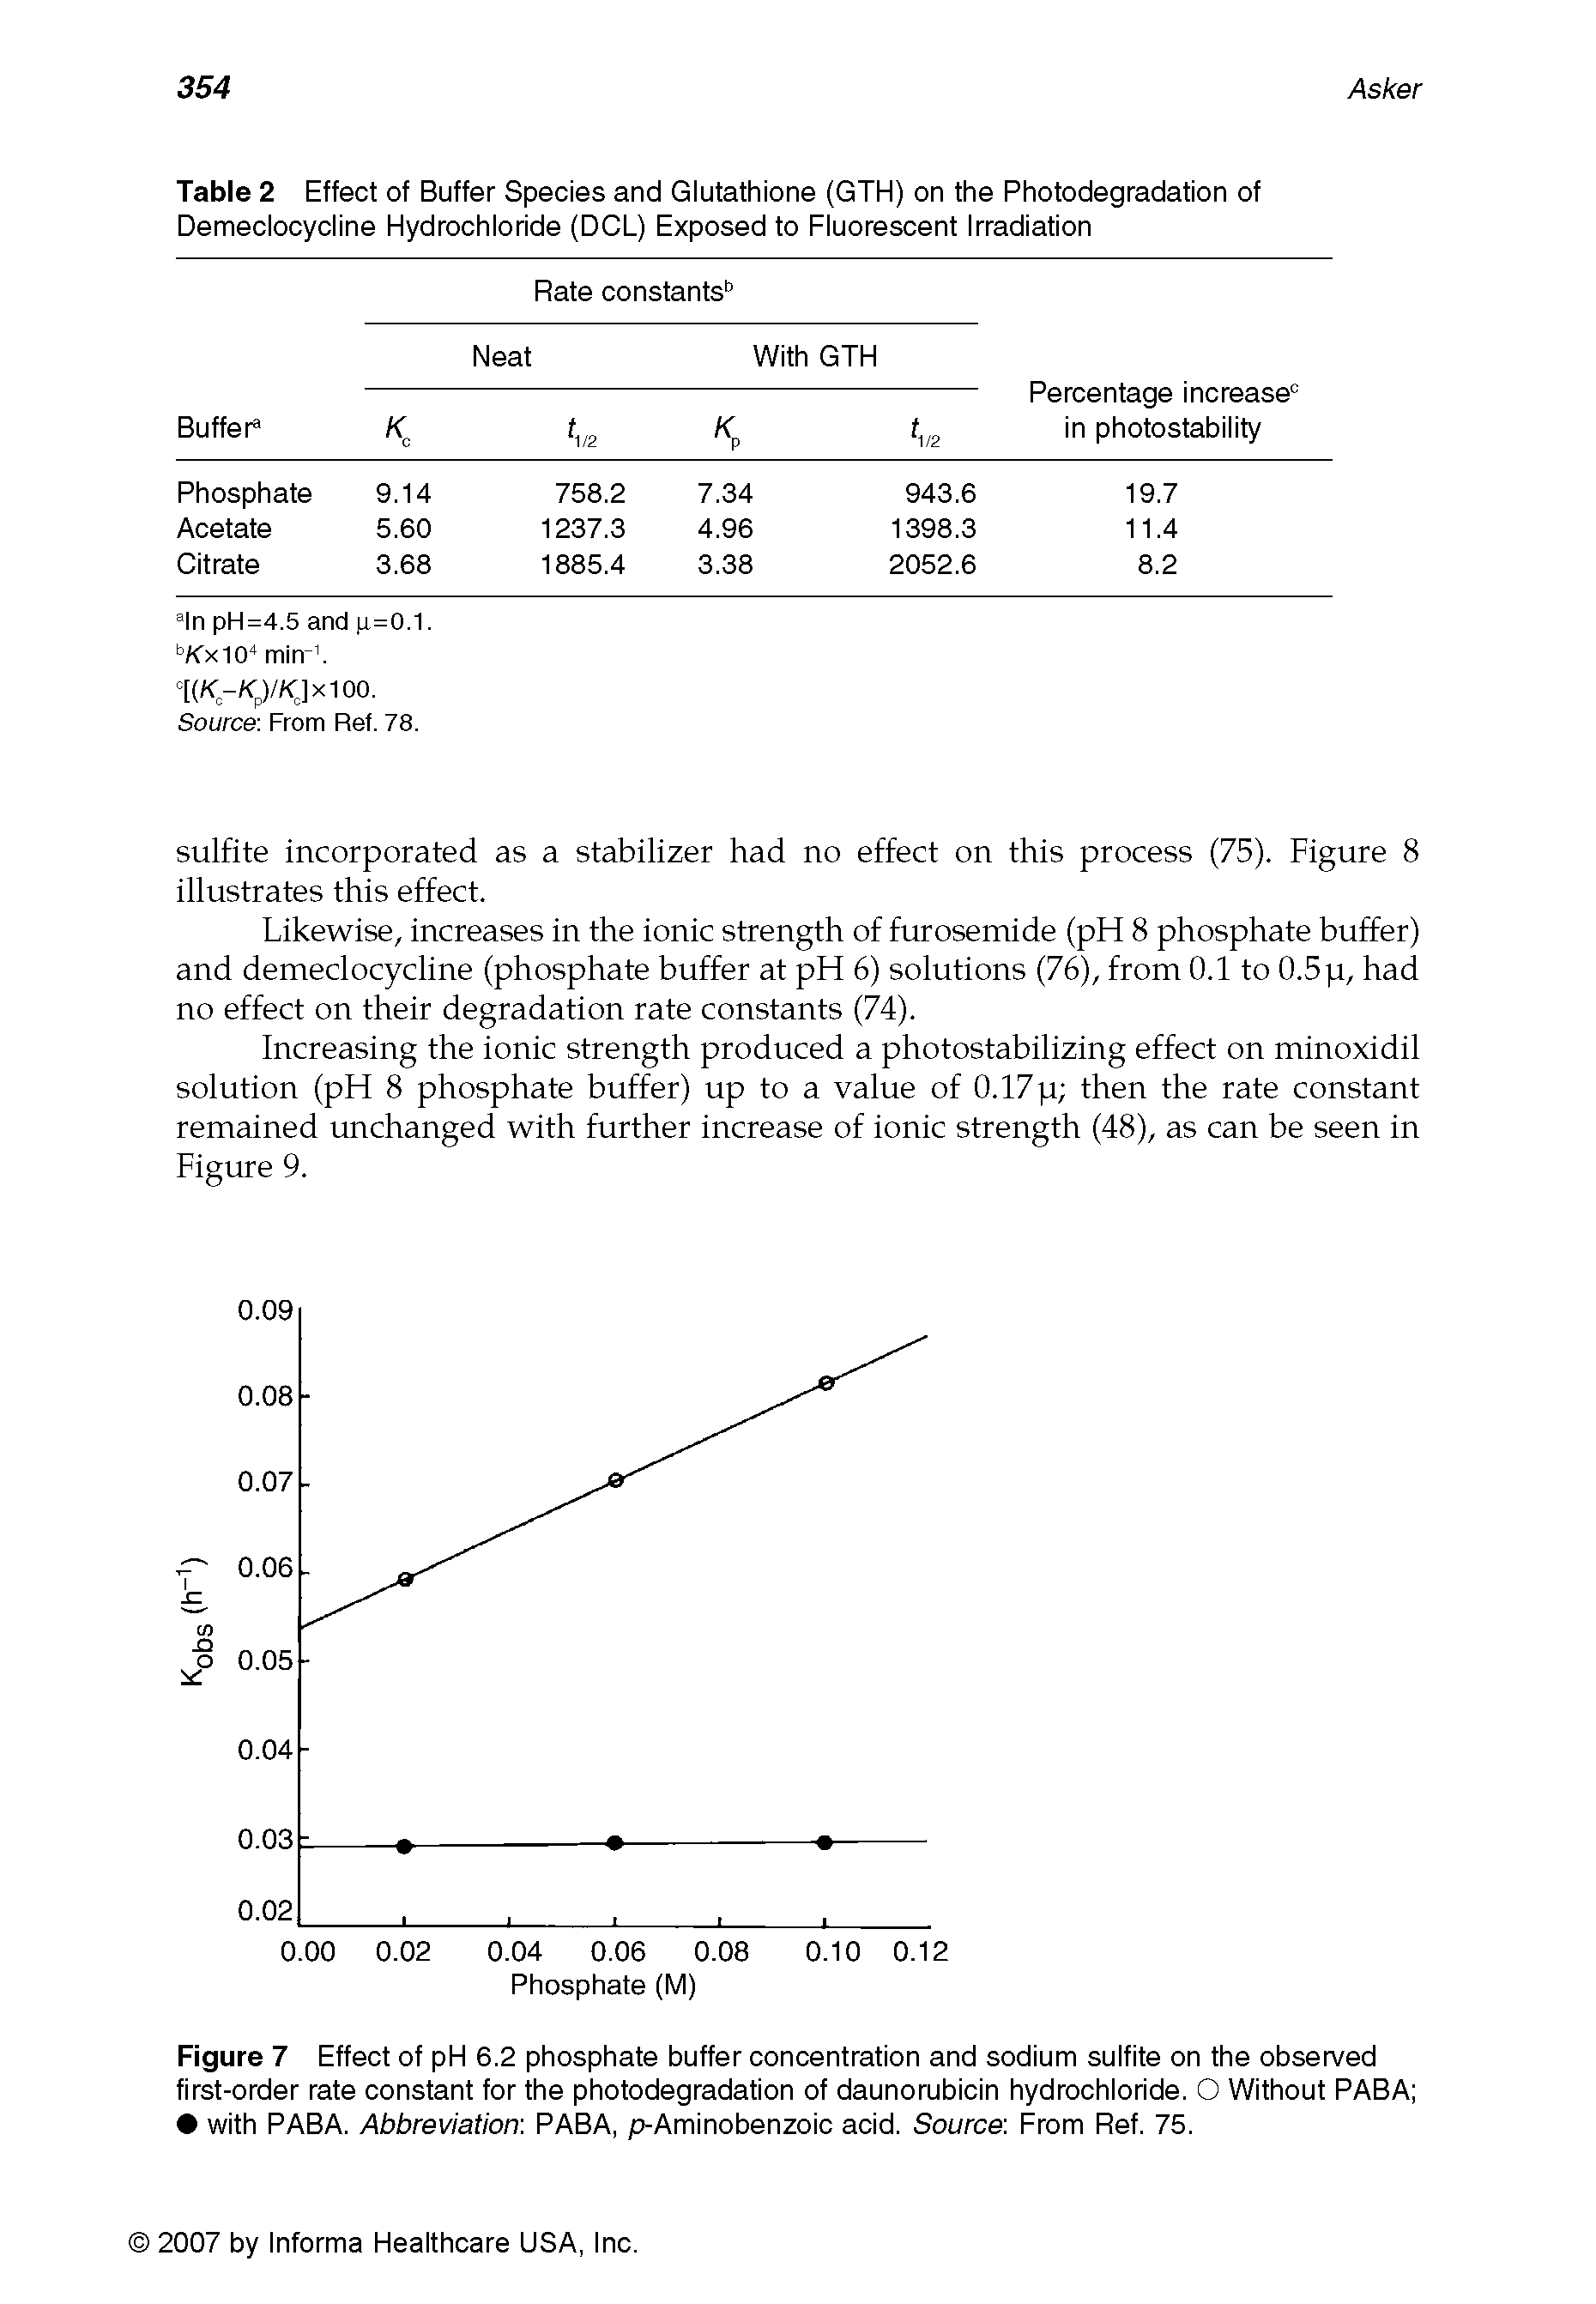 Figure 7 Effect of pH 6.2 phosphate buffer concentration and sodium sulfite on the observed first-order rate constant for the photodegradation of daunorubicin hydrochloride. O Without PABA with PABA. Abbreviation PABA, p-Aminobenzoic acid. Source From Ref. 75.